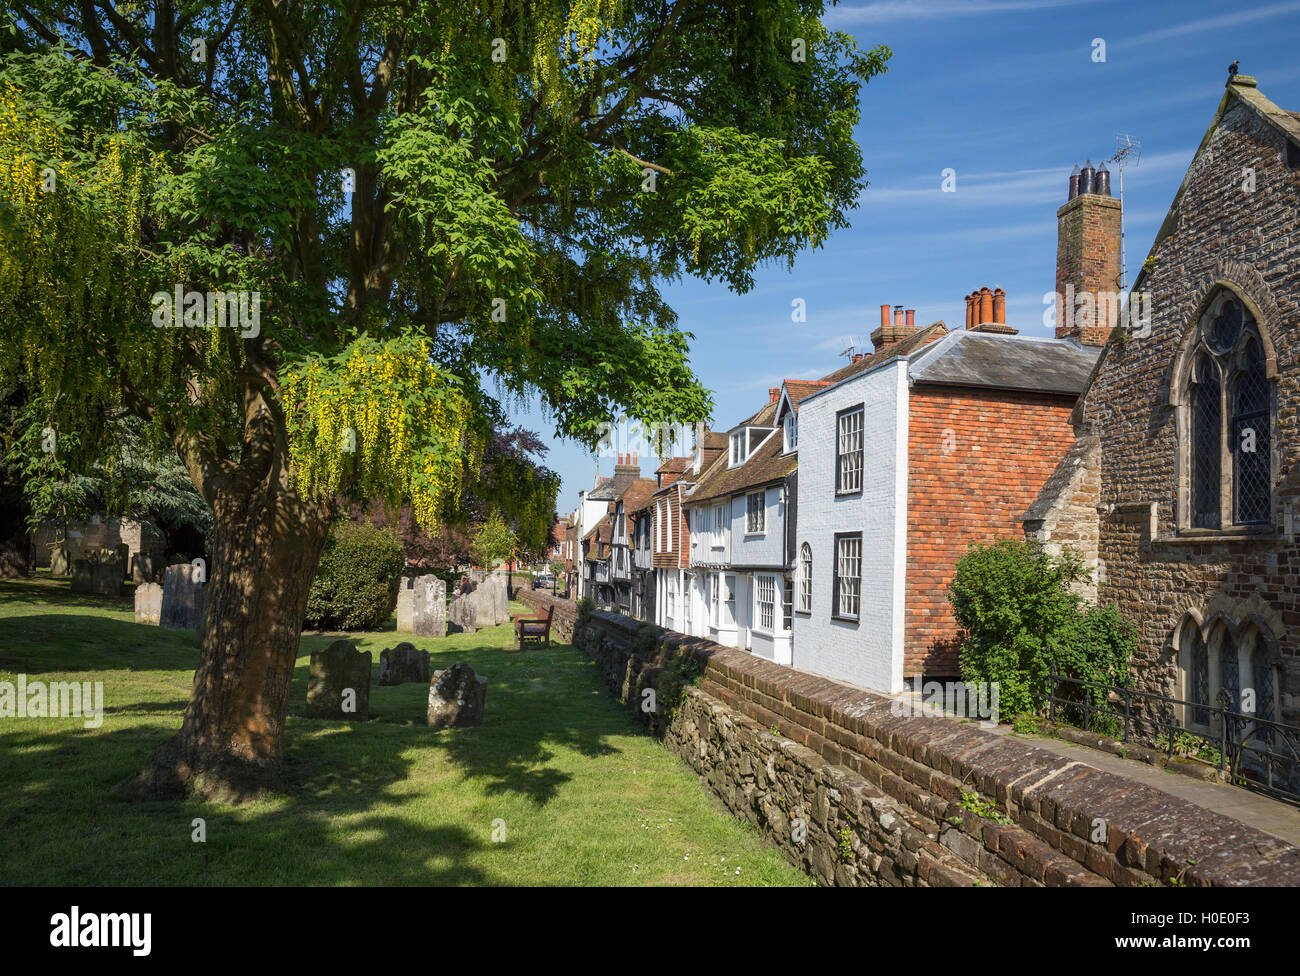 Church Square in Rye. Rye, East Sussex, England, UK Stock Photo